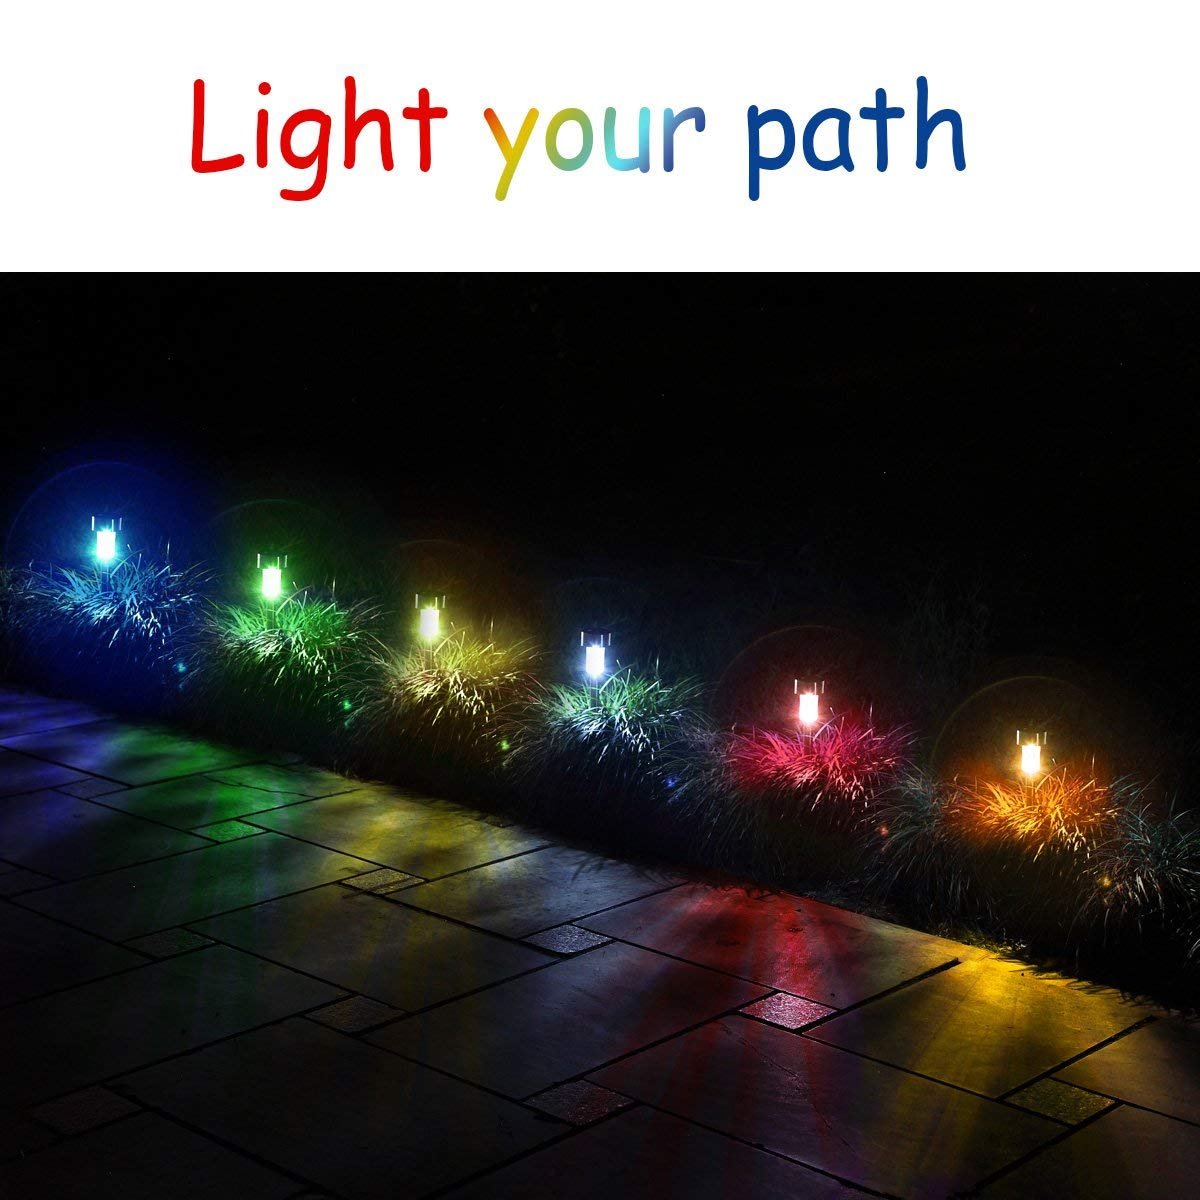 Solar Garden Lights Outdoor 12 Pack, LED Solar Powered Pathway Lights, Stainless Steel Landscape Lighting for Lawn, Patio, Yard, Walkway, Driveway (12 Pack Color) - image 2 of 8